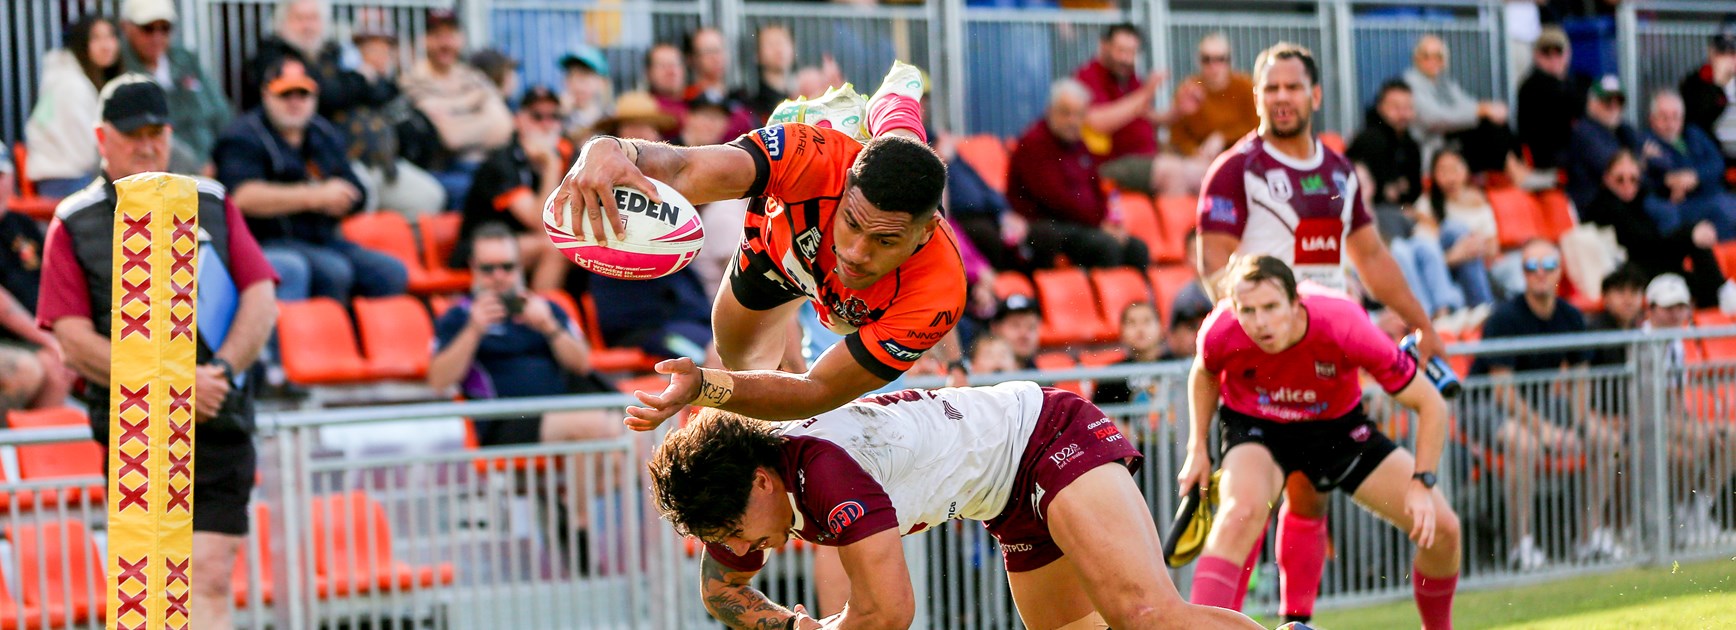 Ronald Philitoga leaps for a try. Photo: Rikki-Lee Arnold/QRL